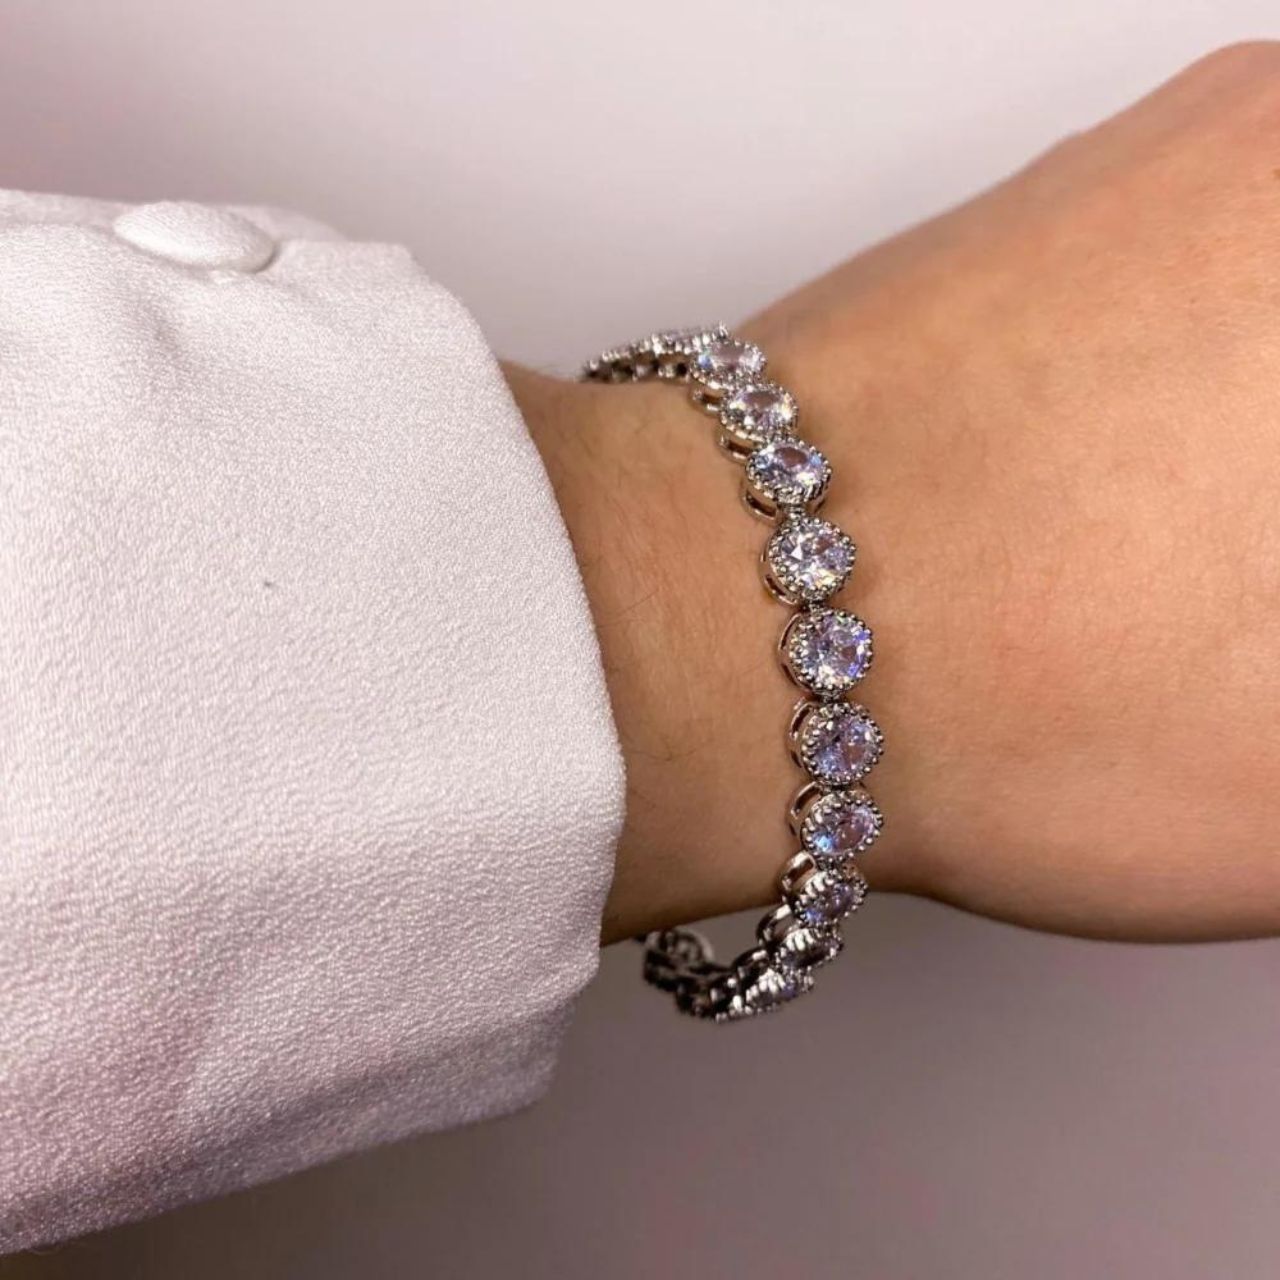 Danna Silver Plated Tennis Bracelet by Knight & Day  Beautiful rhodium plated tennis bracelet with CZ stones. Fold over clasp fastening.